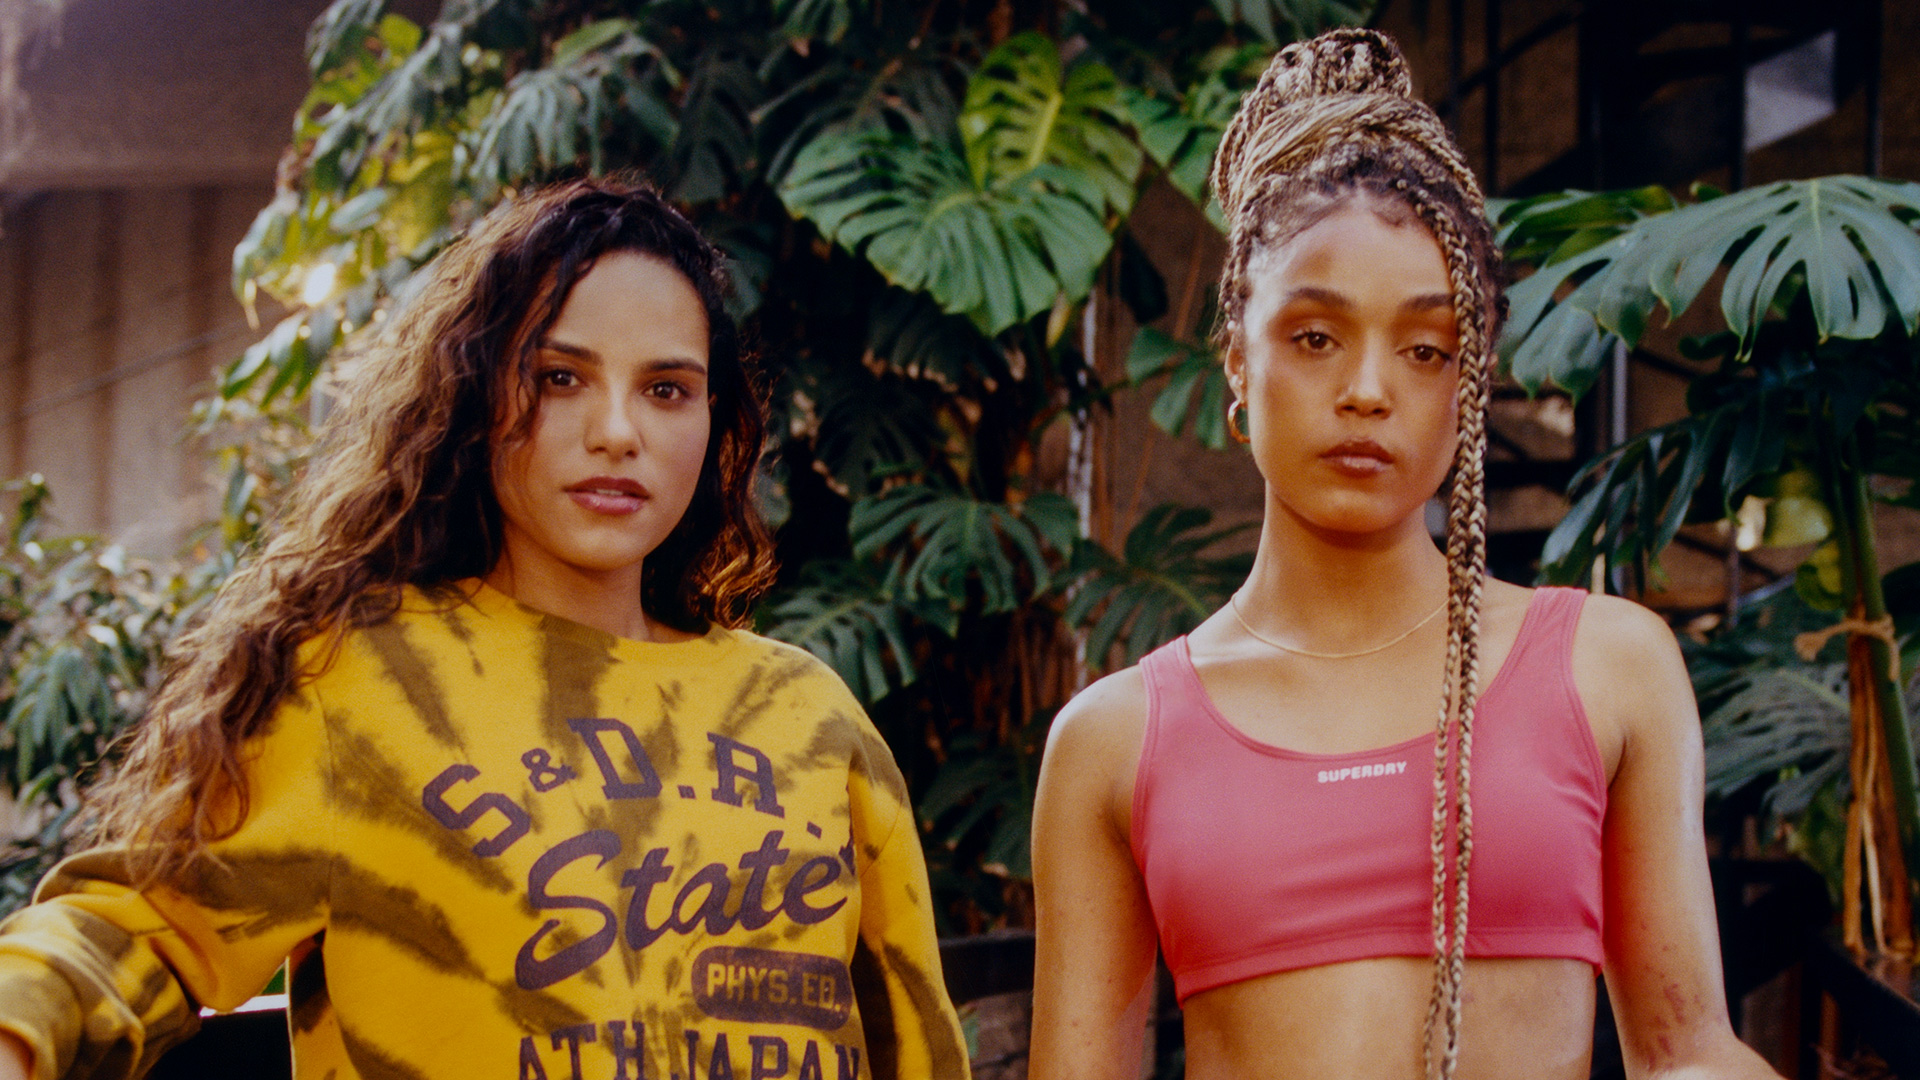 Two young women standing in front of large fronds, the one on the left is wearing a yellow S&DR state jumper and the one on the right is wearing a pink crop top with Superdry in small white lettering